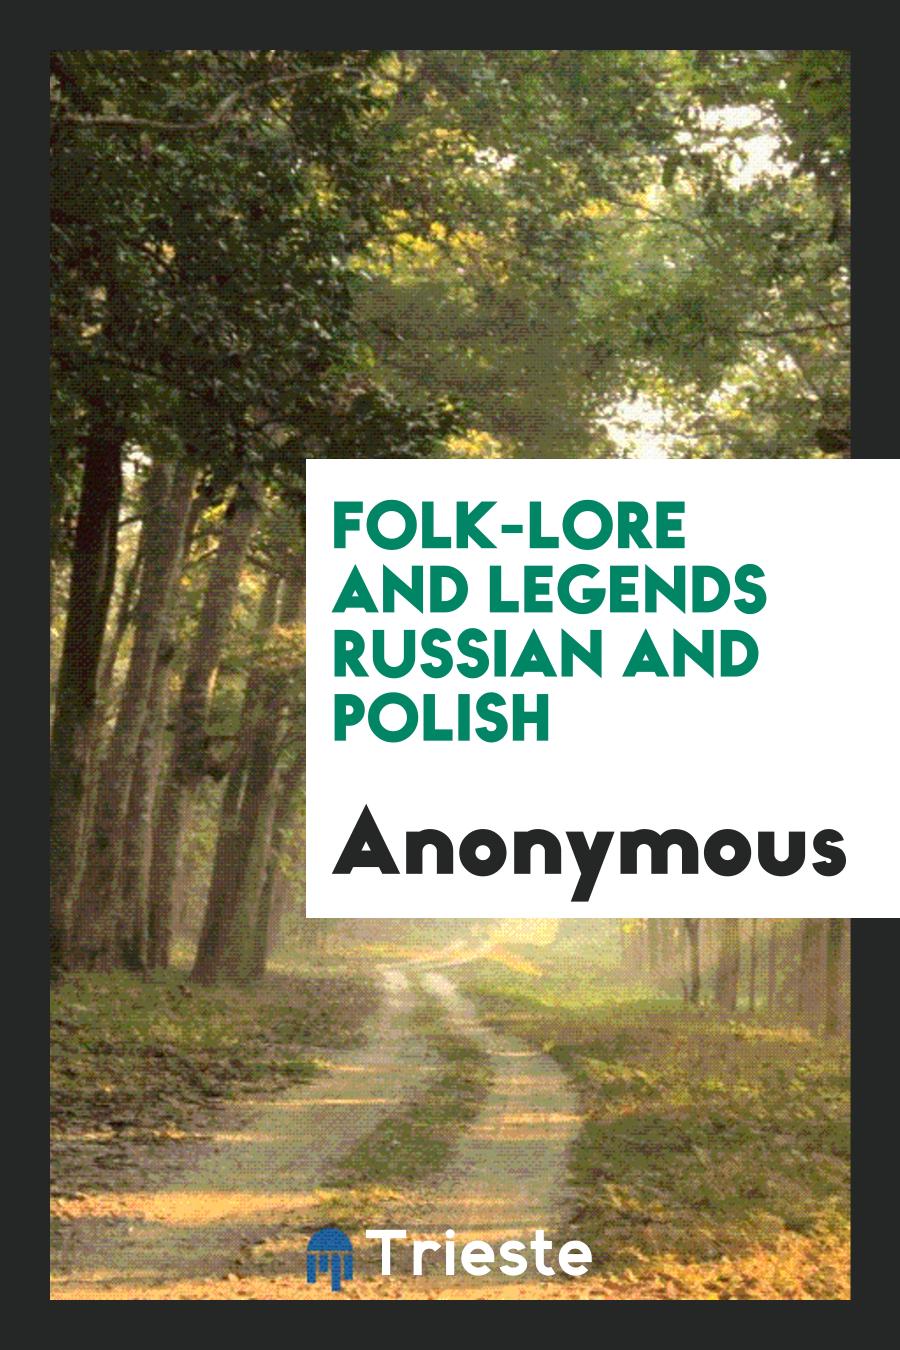 Folk-lore and legends Russian and Polish